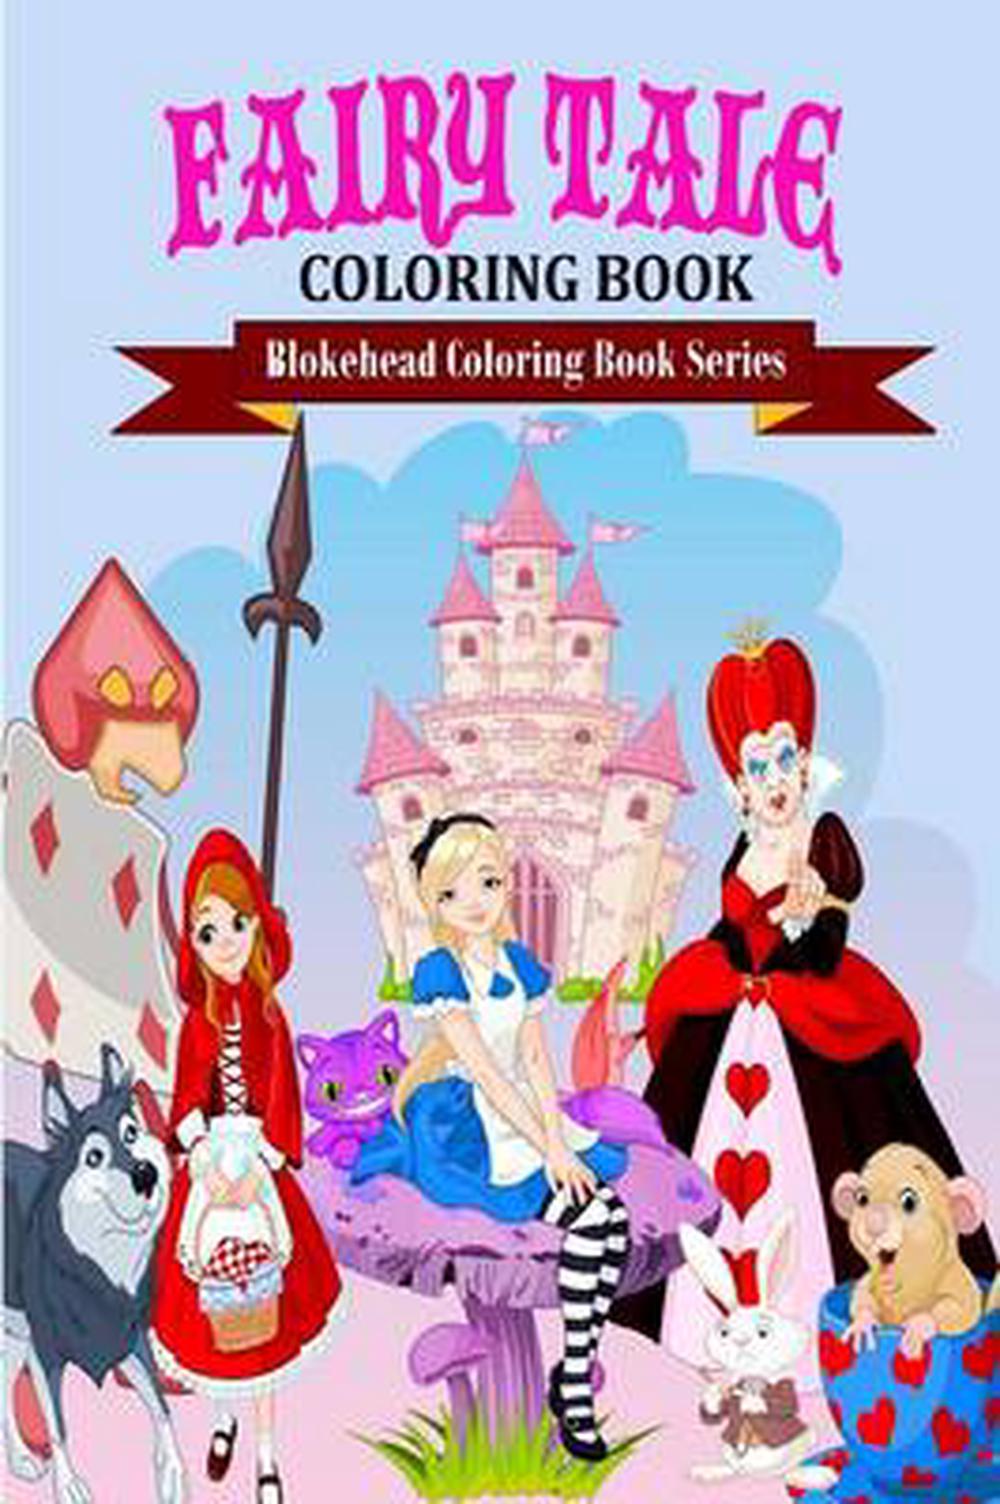 Fairy Tales Coloring Book by The Blokehead (English) Paperback Book